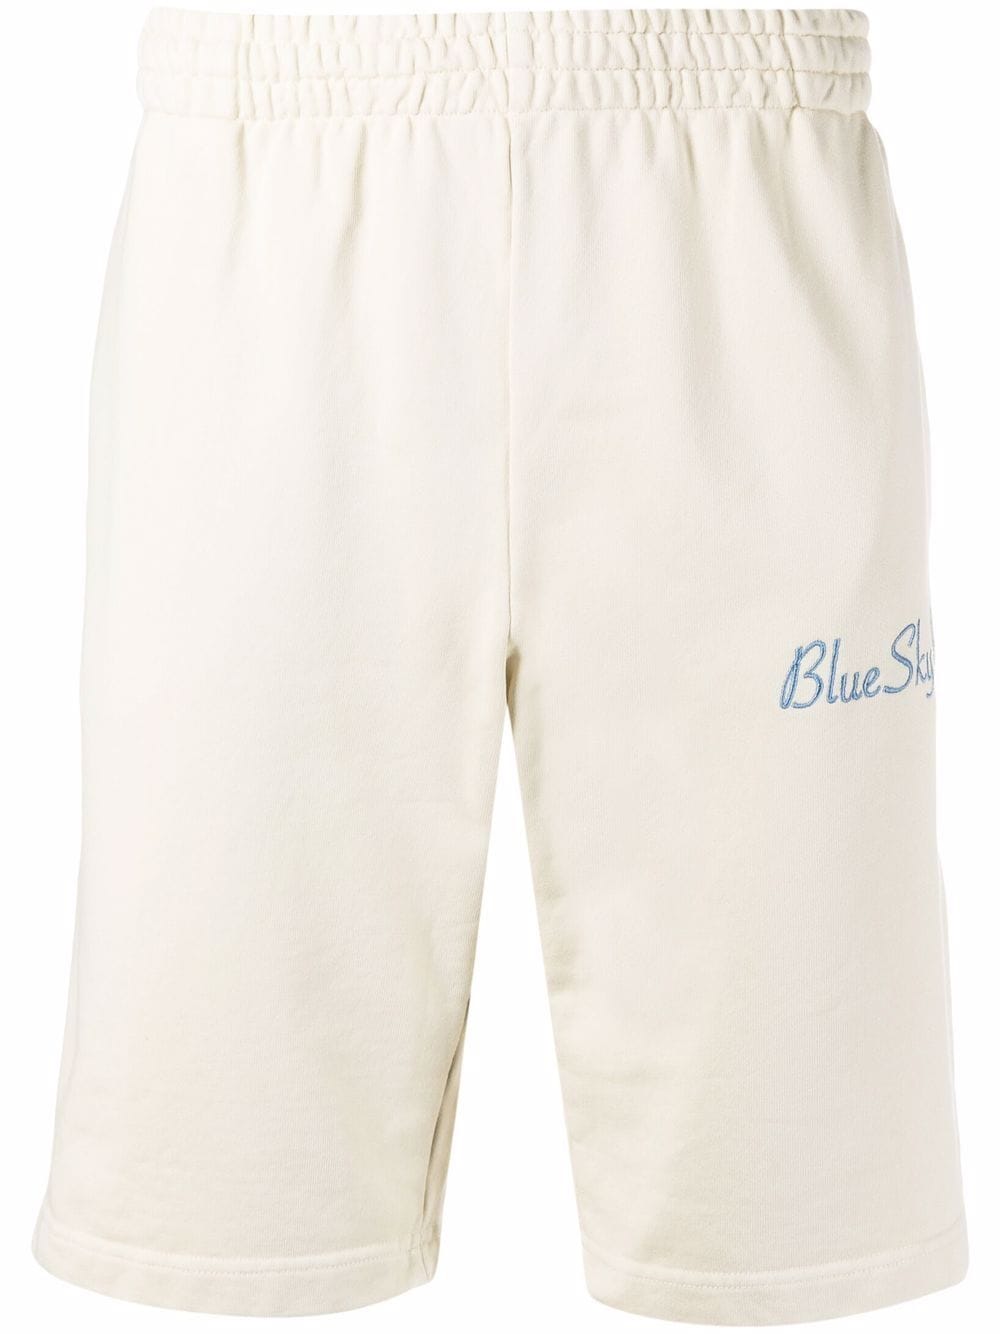 logo-embroidered cotton shorts